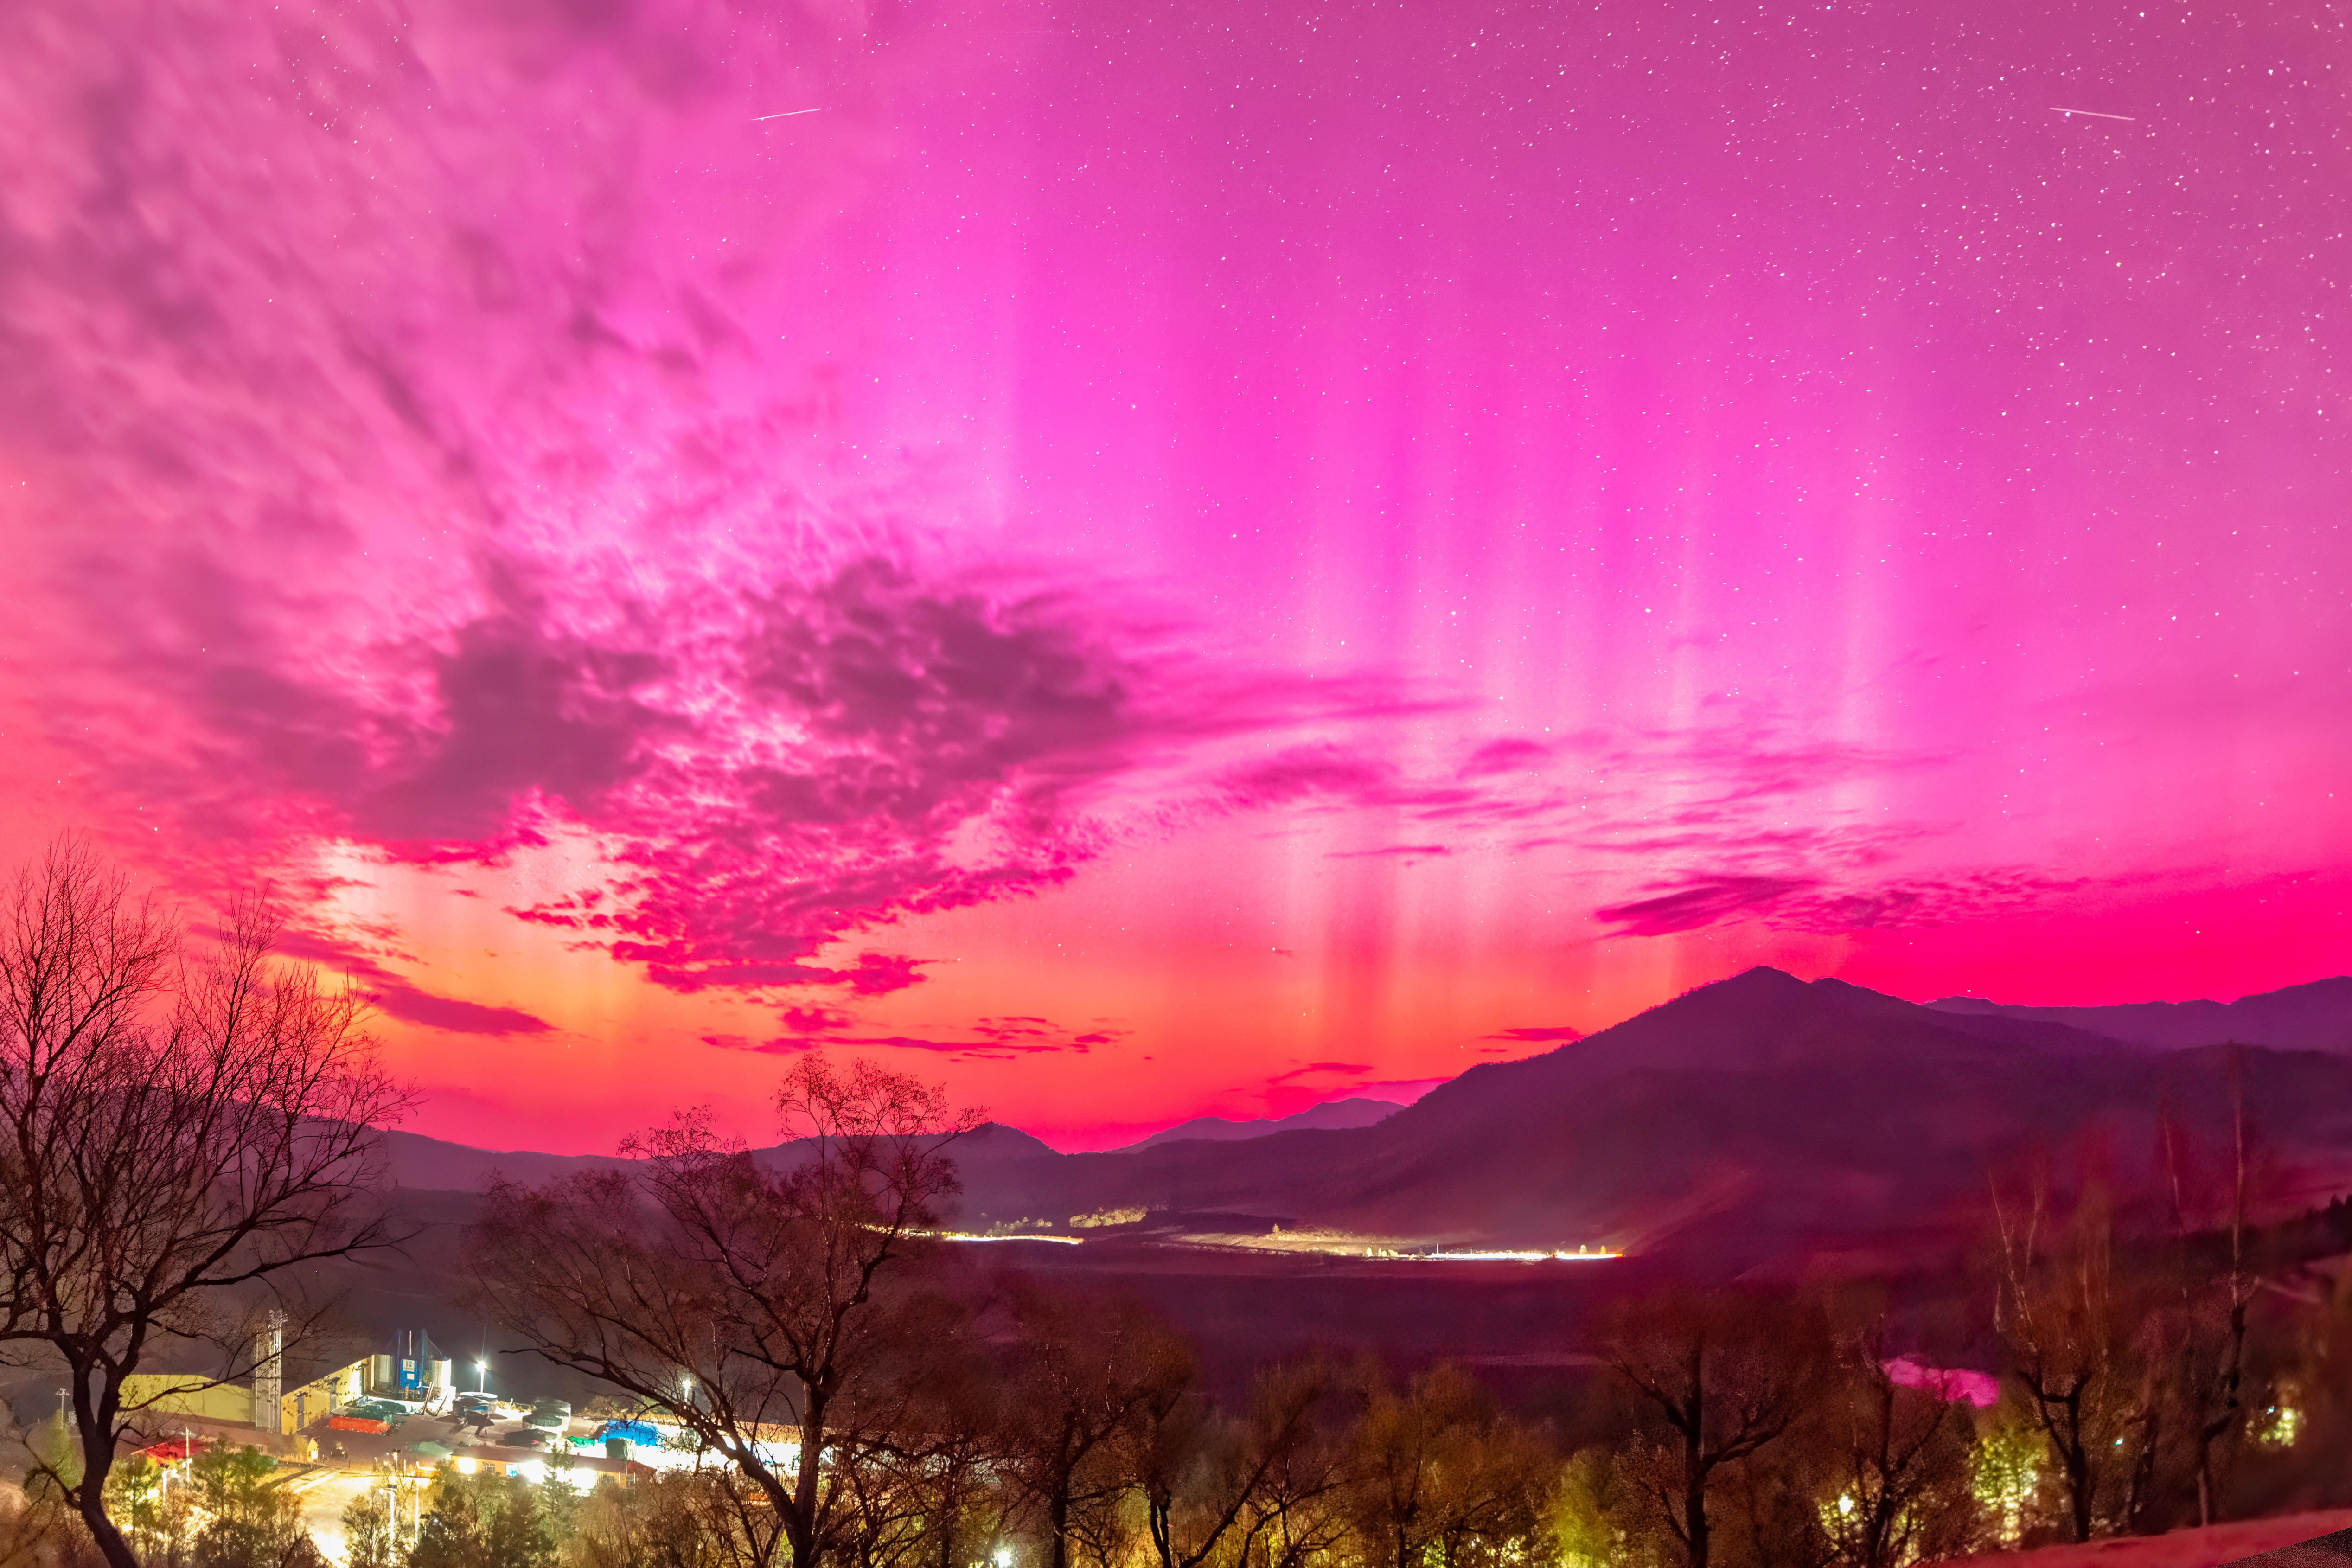 A bright pink sky over Hulunbuir city in China.